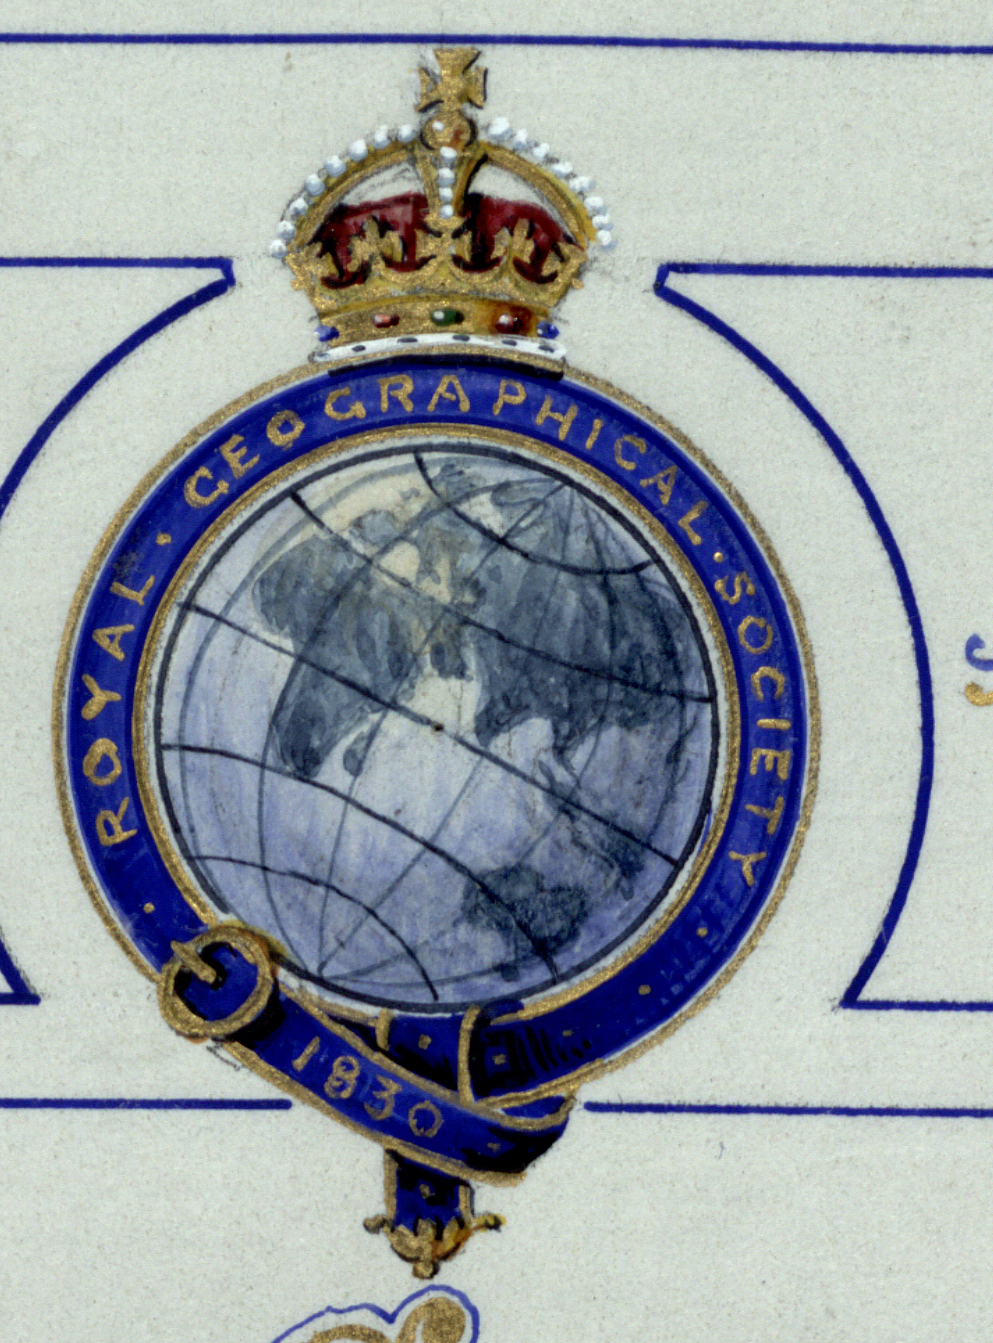 The globe cartouche of the Royal Geographical Society